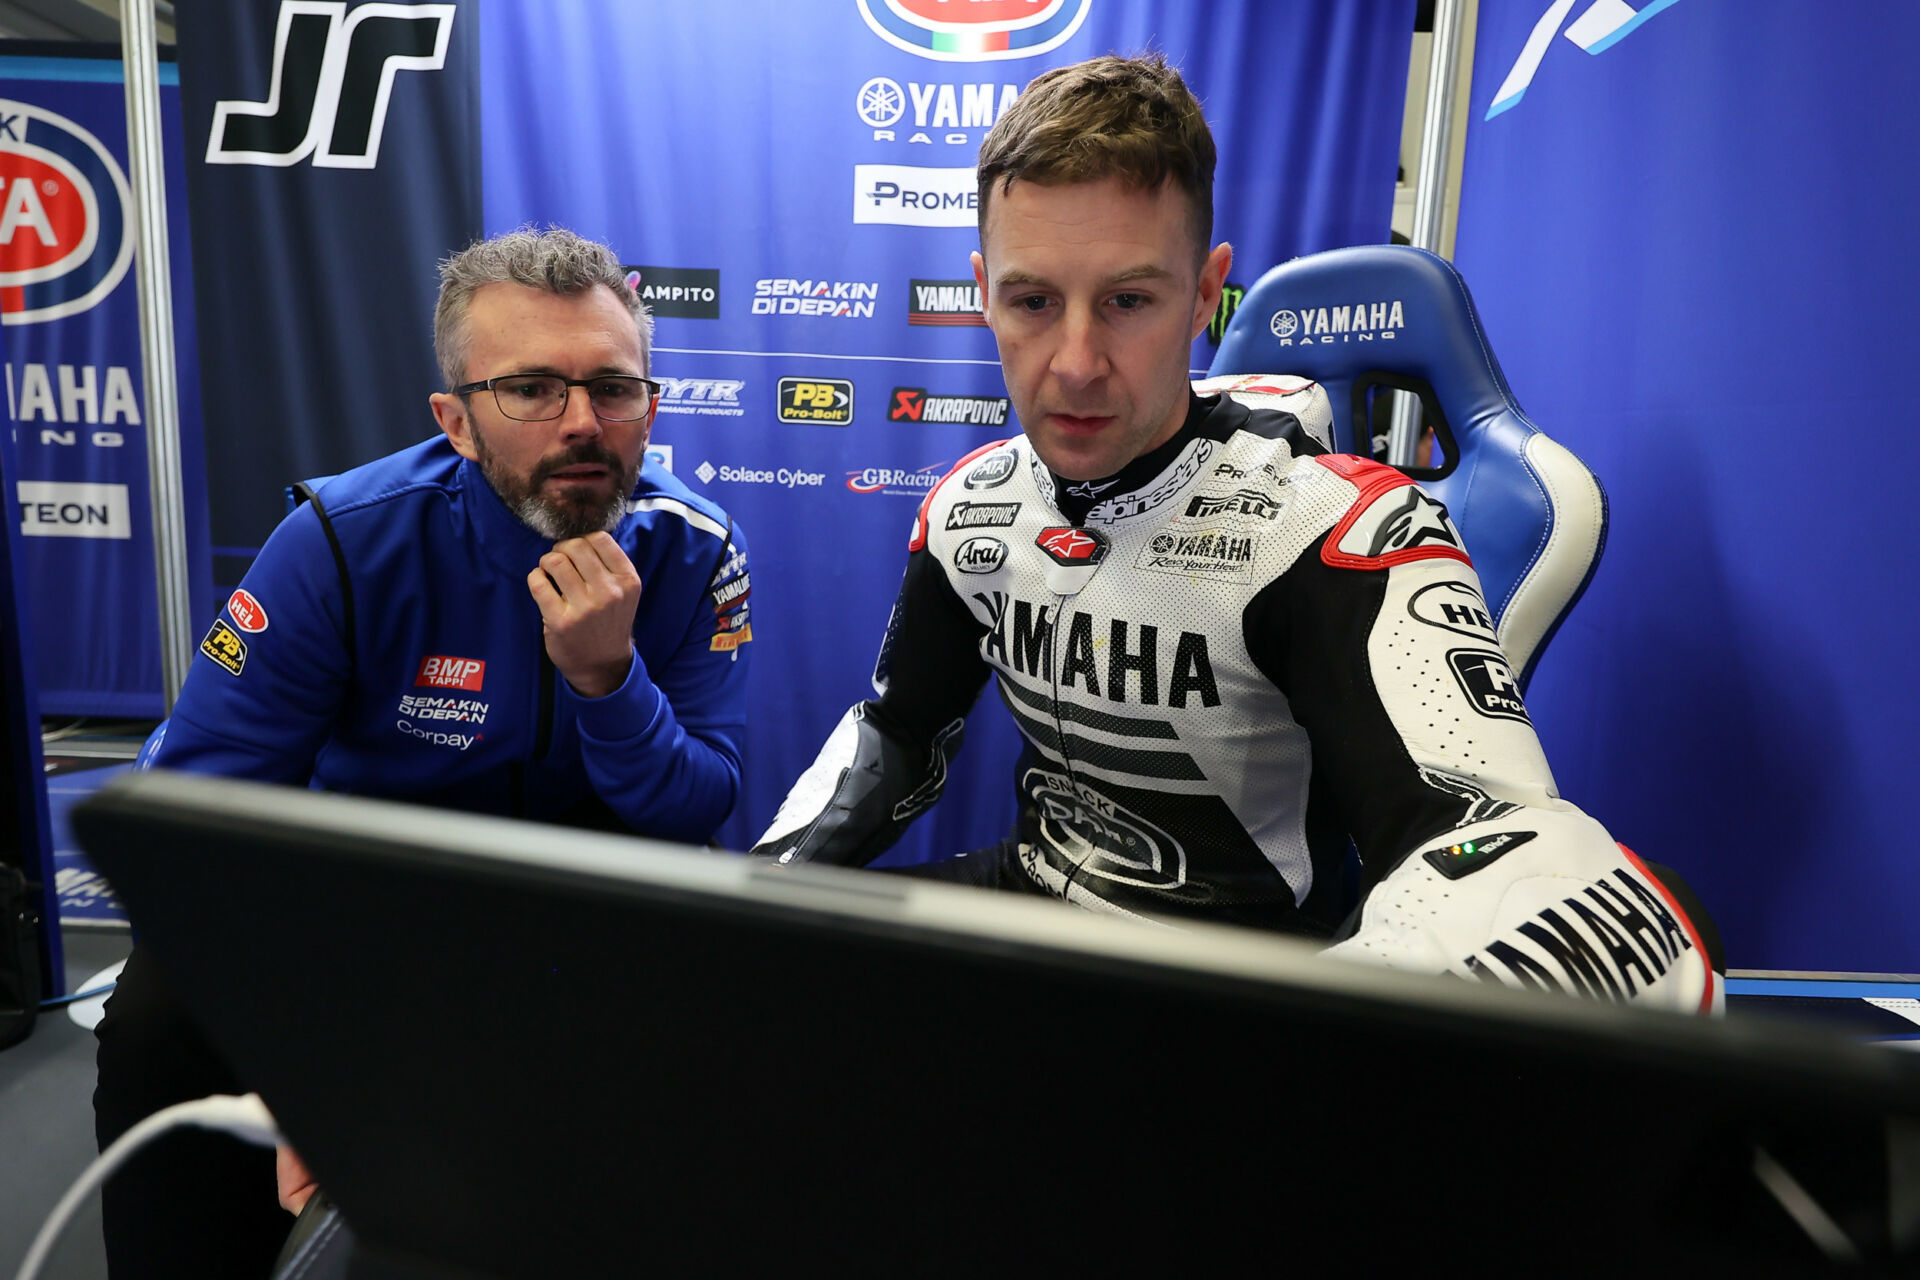 Jonathan Rea (right) with his new Crew Chief Andrew Pitt (left) during a recent test at Jerez. Photo courtesy Dorna.